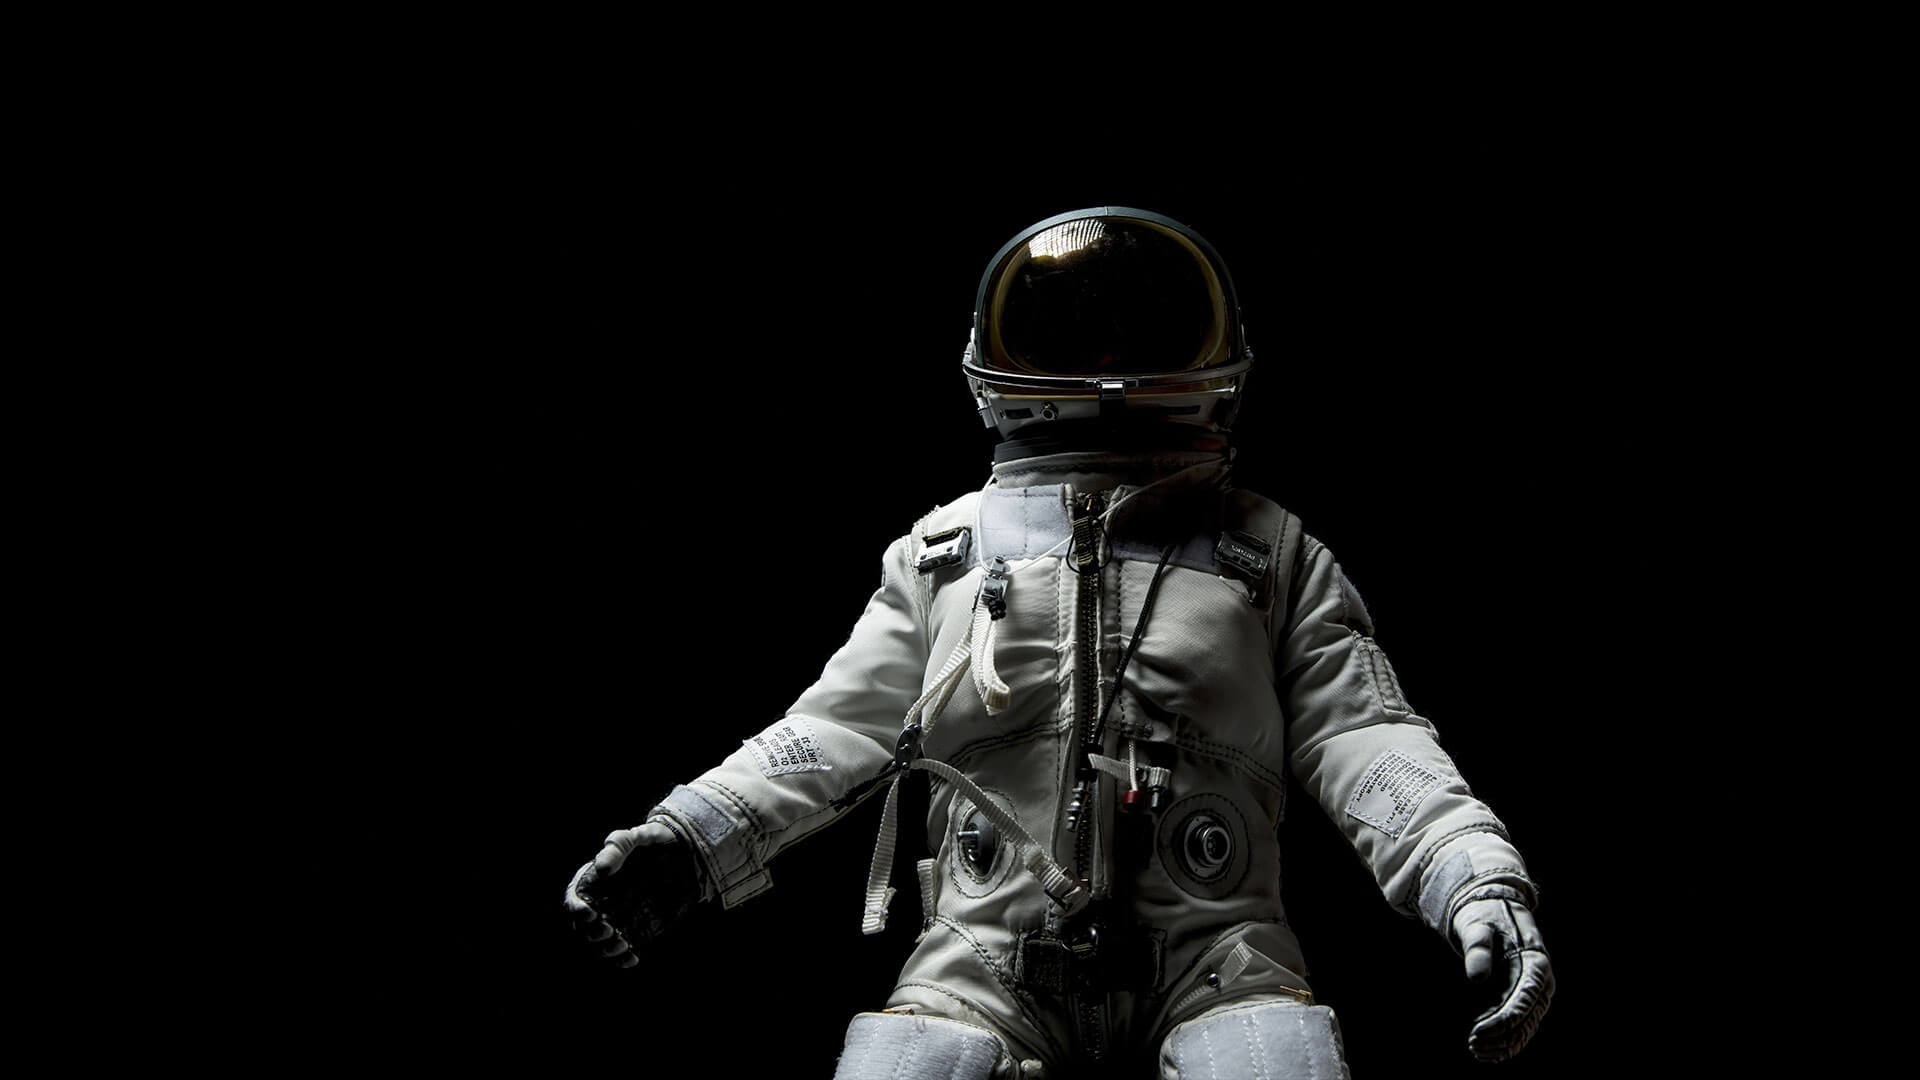 The Fascinating Creepy New Research In Human Hibernation For Space Travel